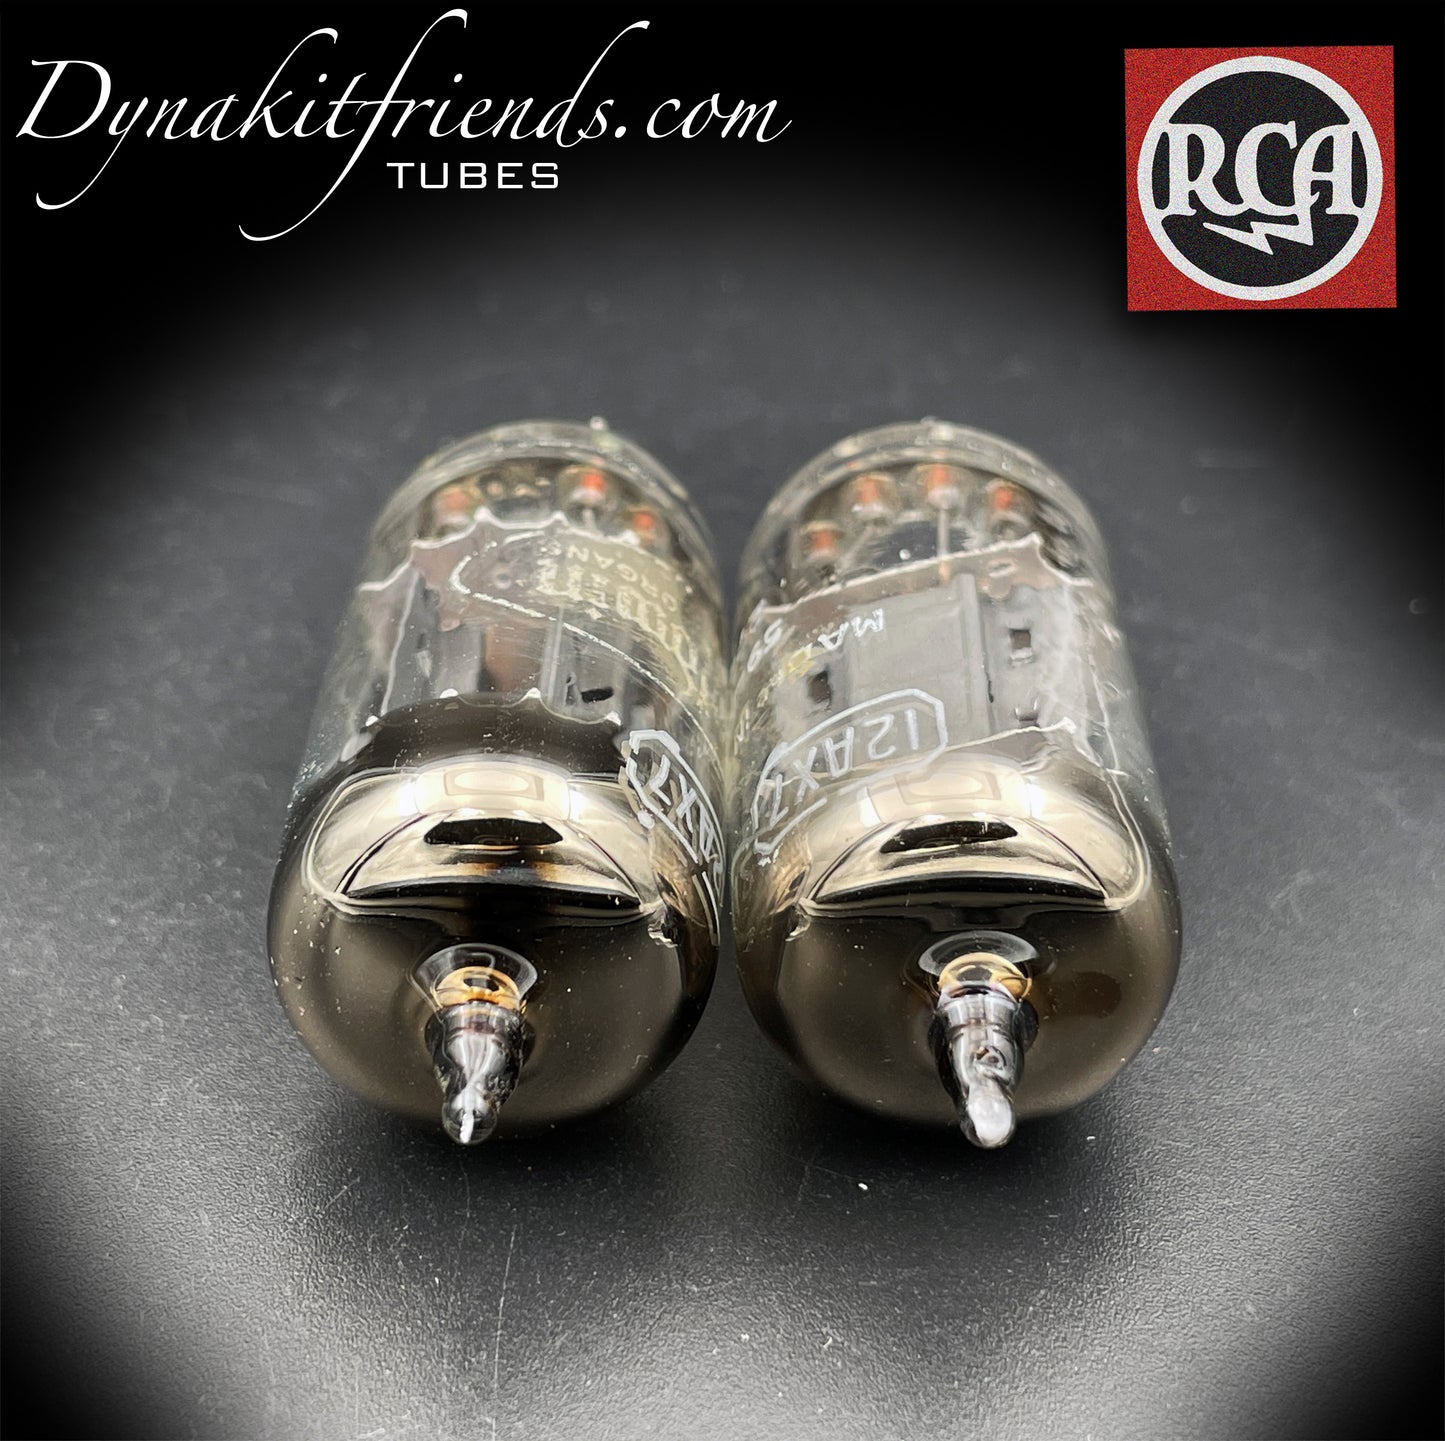 12AX7 ( ECC83 ) RCA Brand Baldwin Long Gray Plates Square Getter Matched Tubes MADE IN USA '59